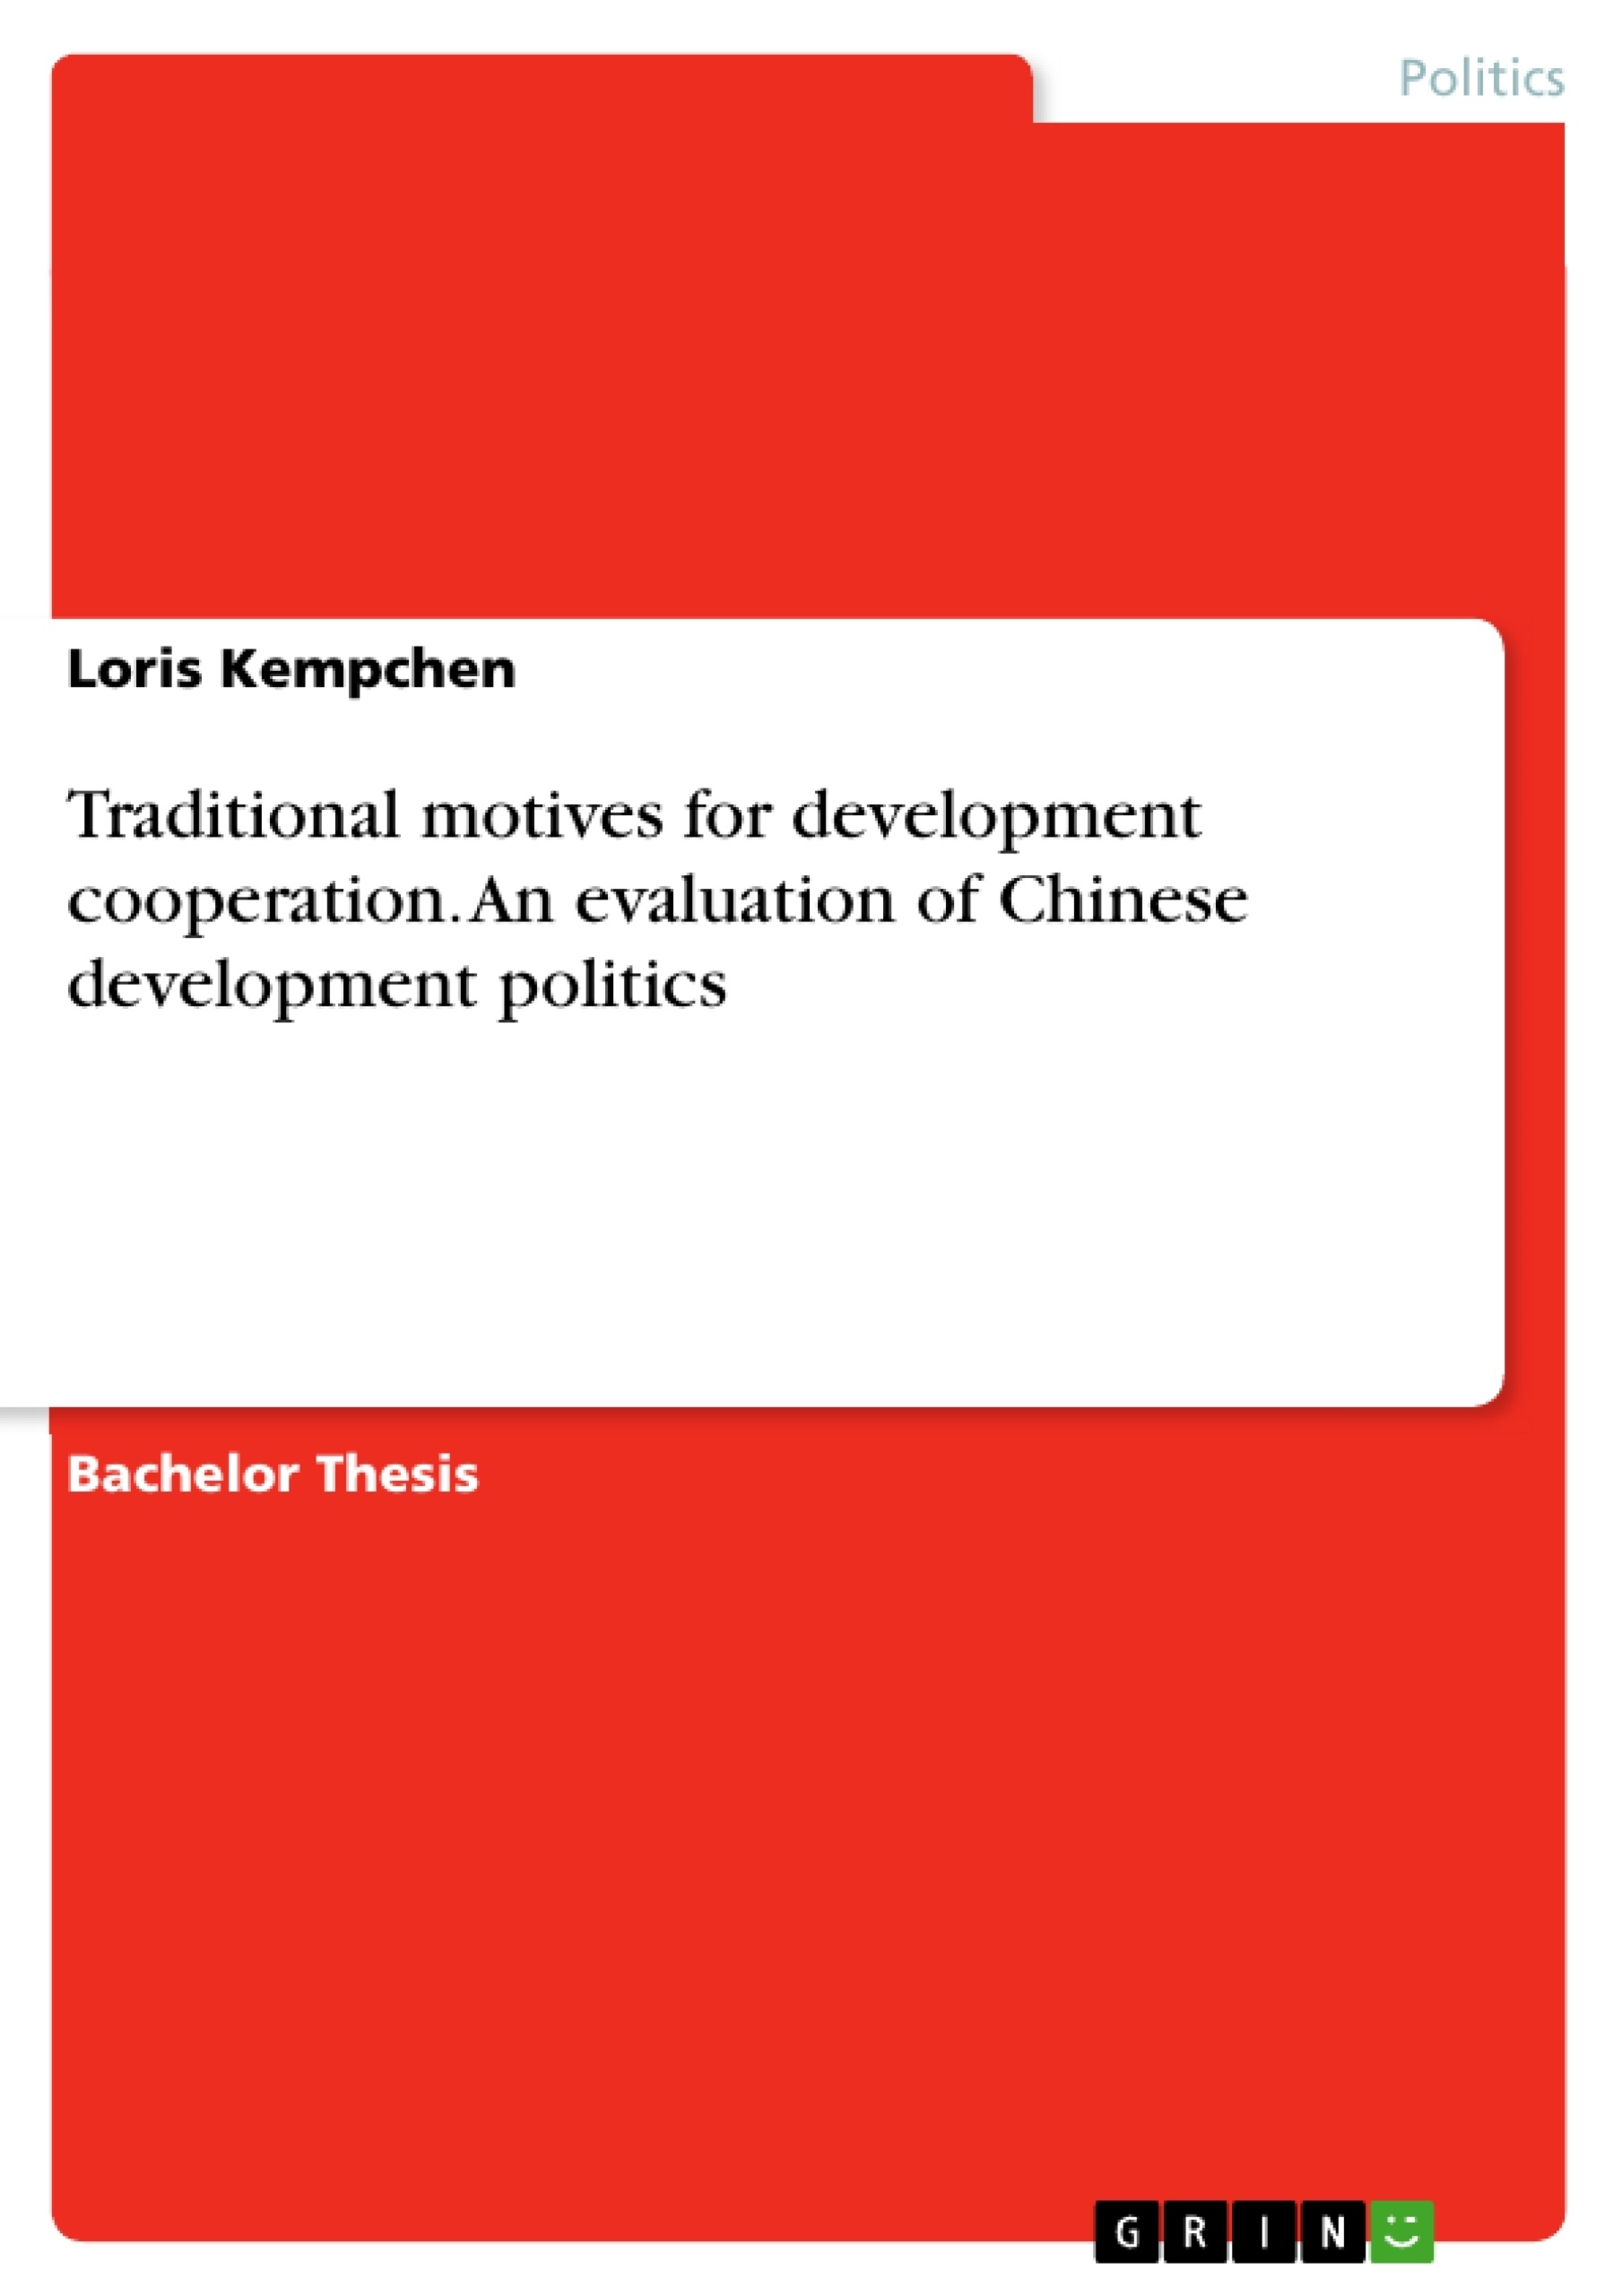 Title: Traditional motives for development cooperation. An evaluation of Chinese development politics